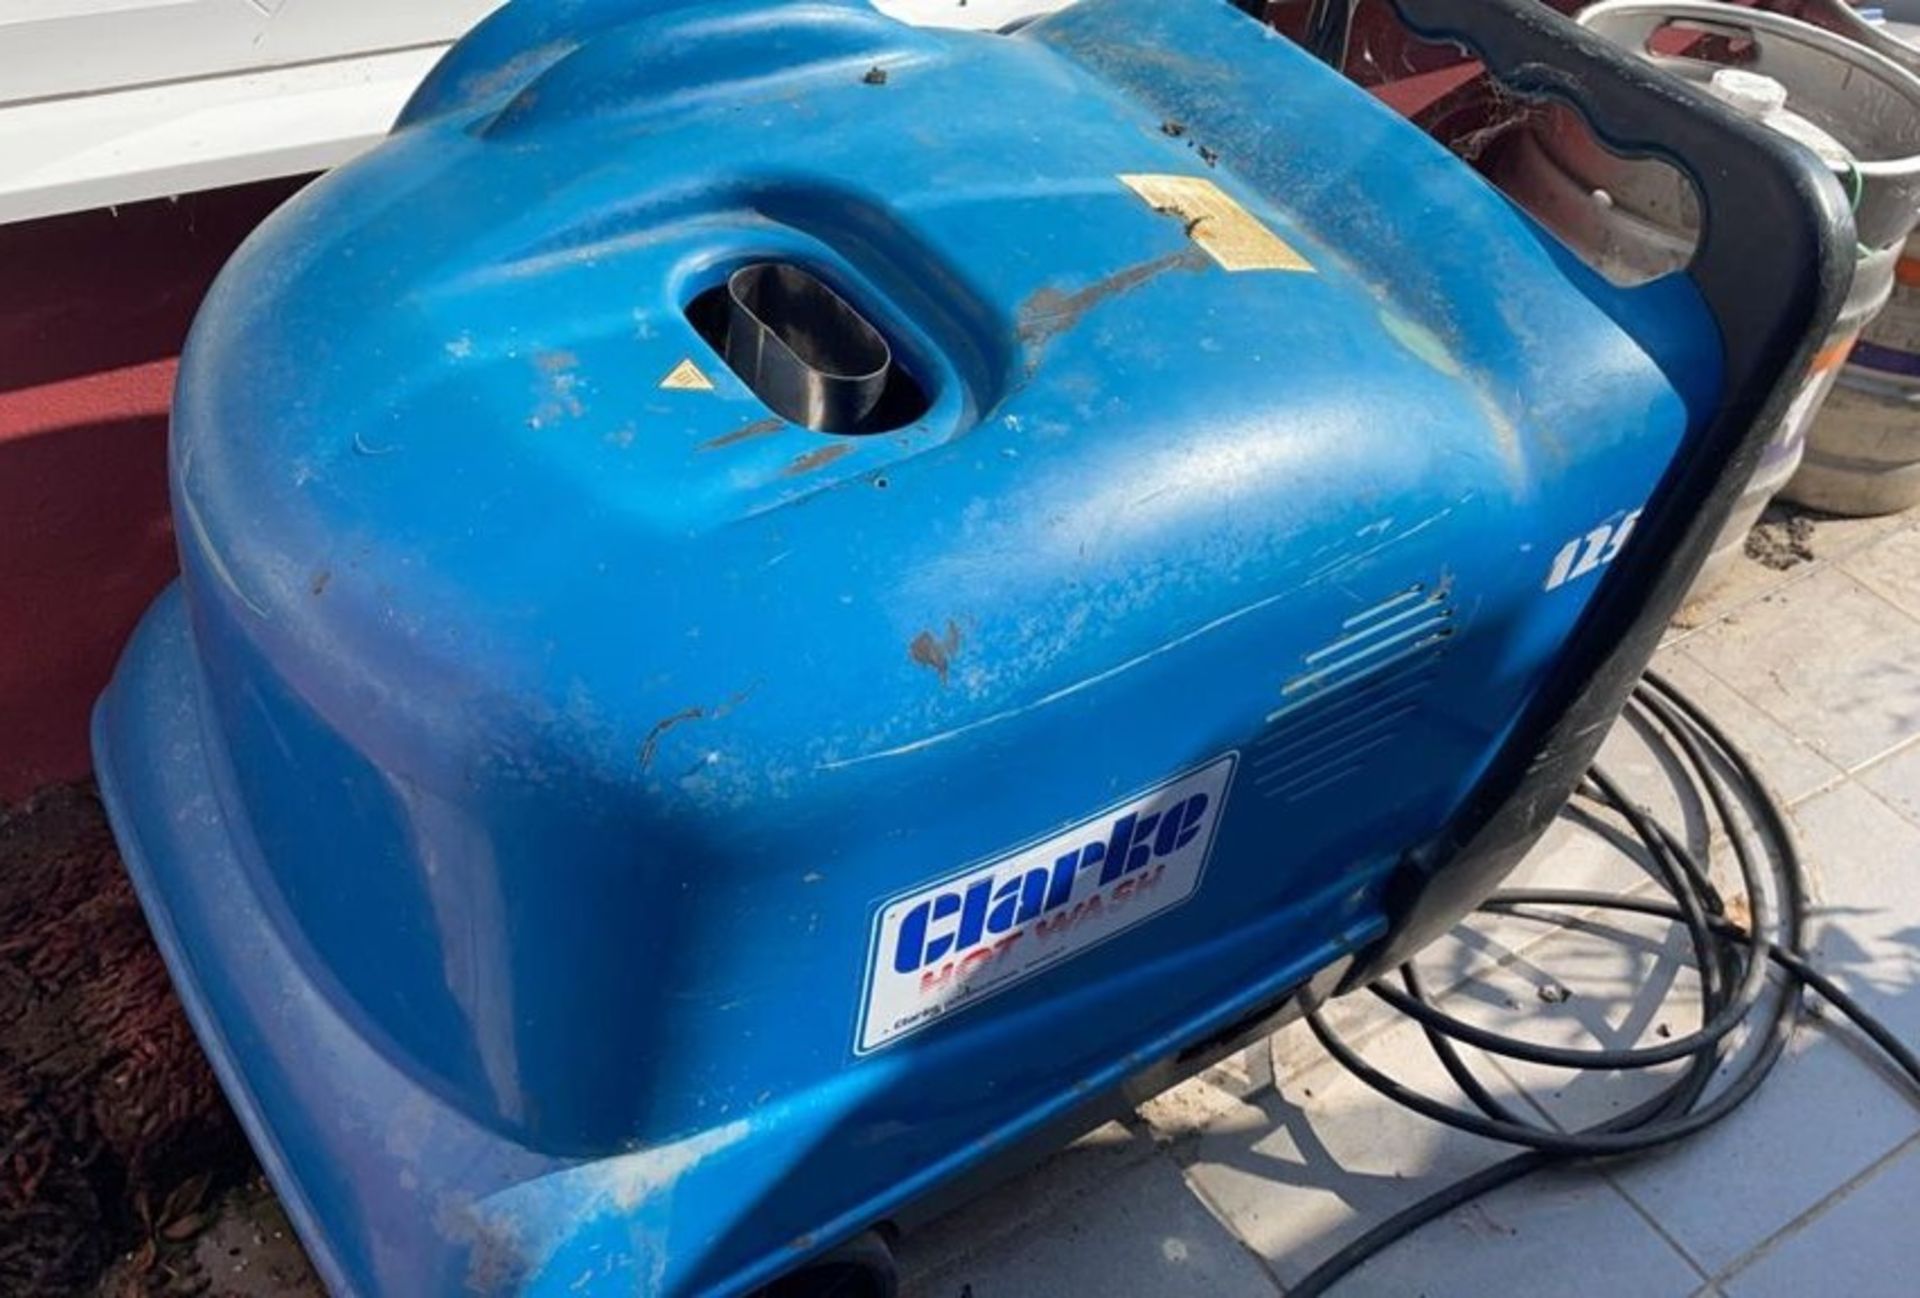 1 x Clarke Hot Wash Pressure Washer - CL667 - Location: Brighton, Sussex, BN24 Collections:This item